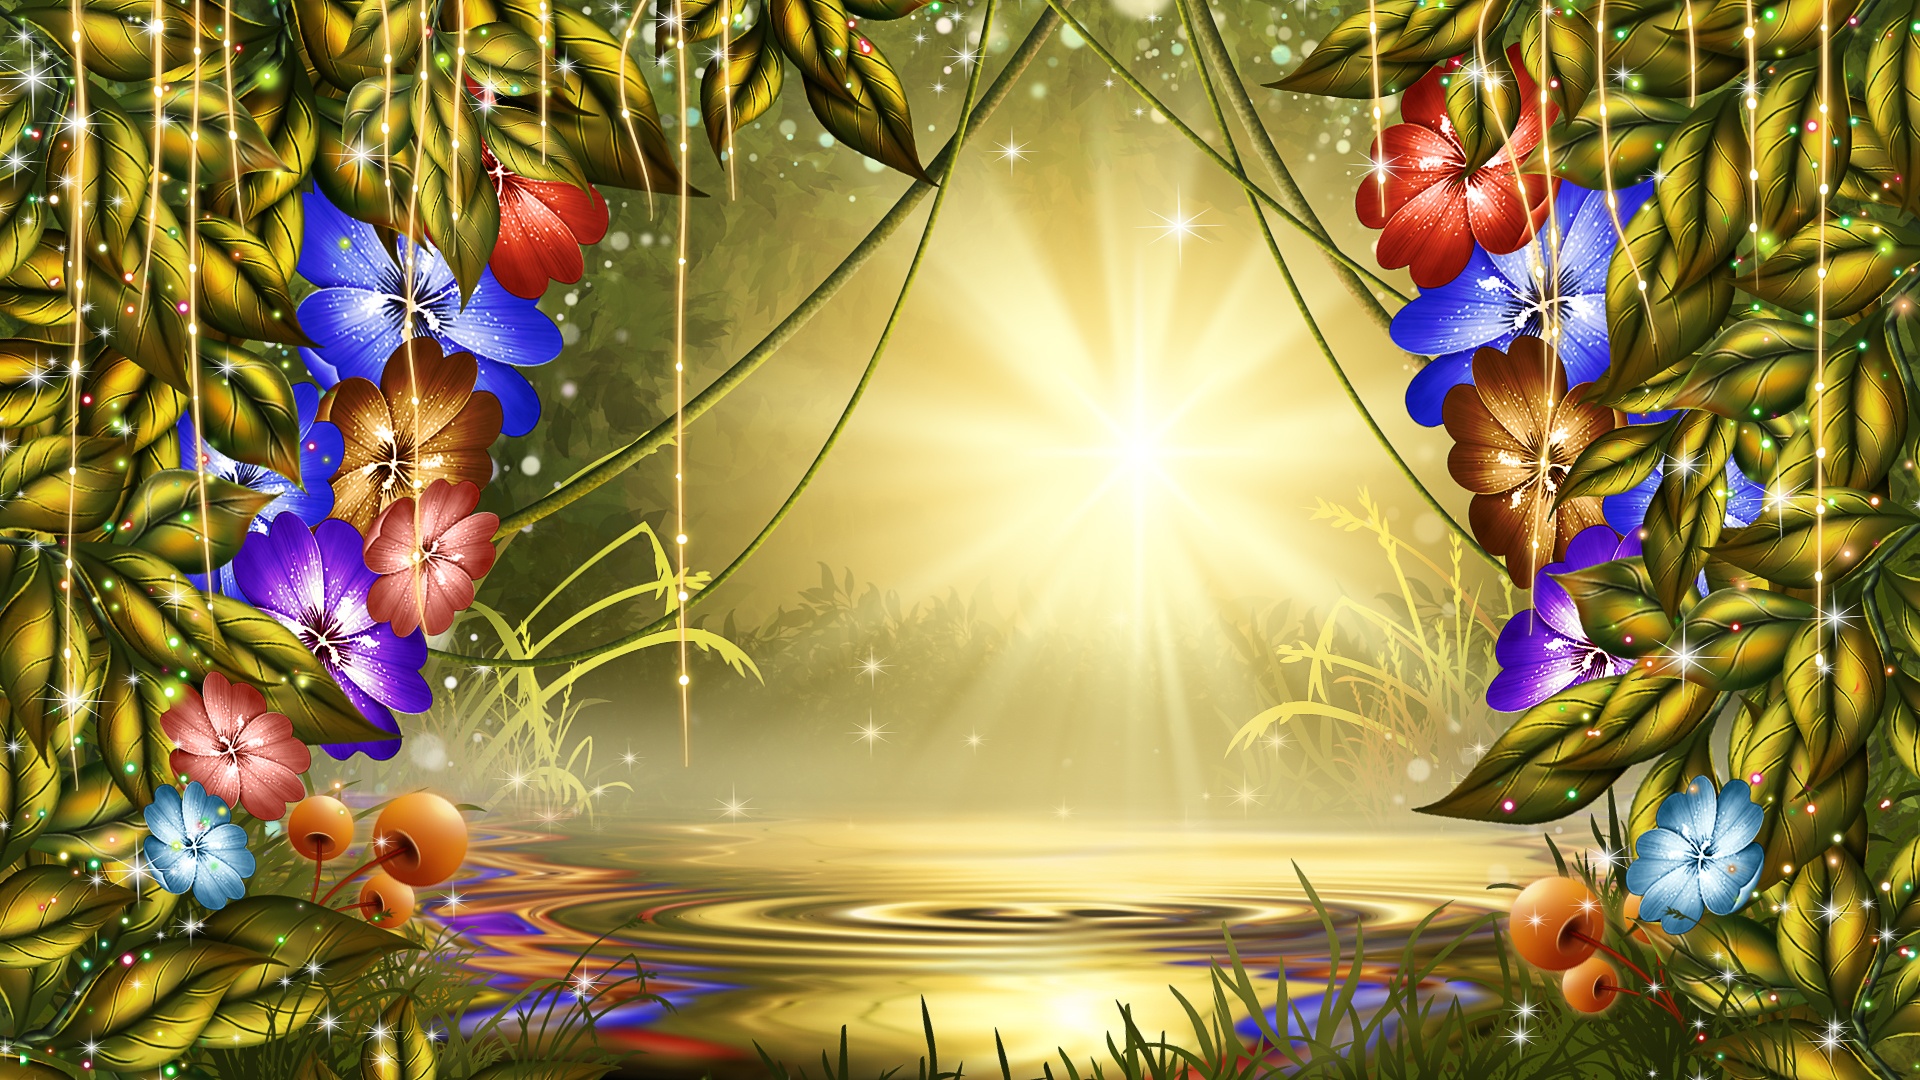 Background Wallpaper Fairy Forest Grass Photo From Needpix